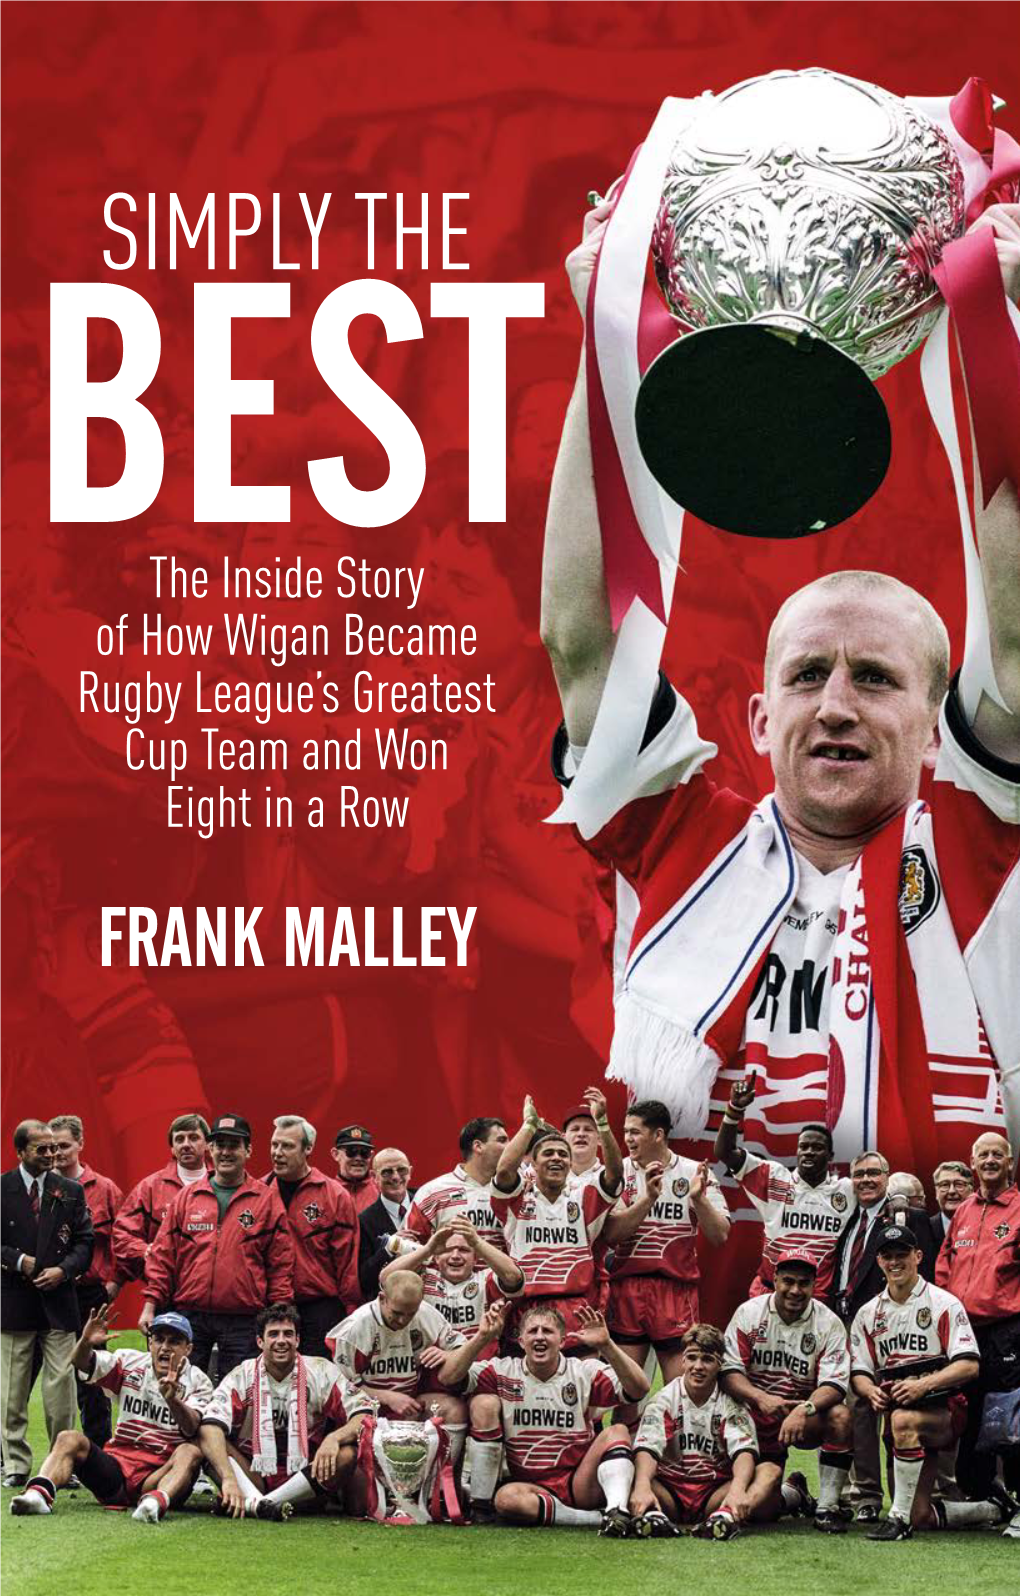 SIMPLY the BEST the Inside Story of How Wigan Became Rugby League’S Greatest Cup Team and Won Eight in a Row FRANK MALLEY